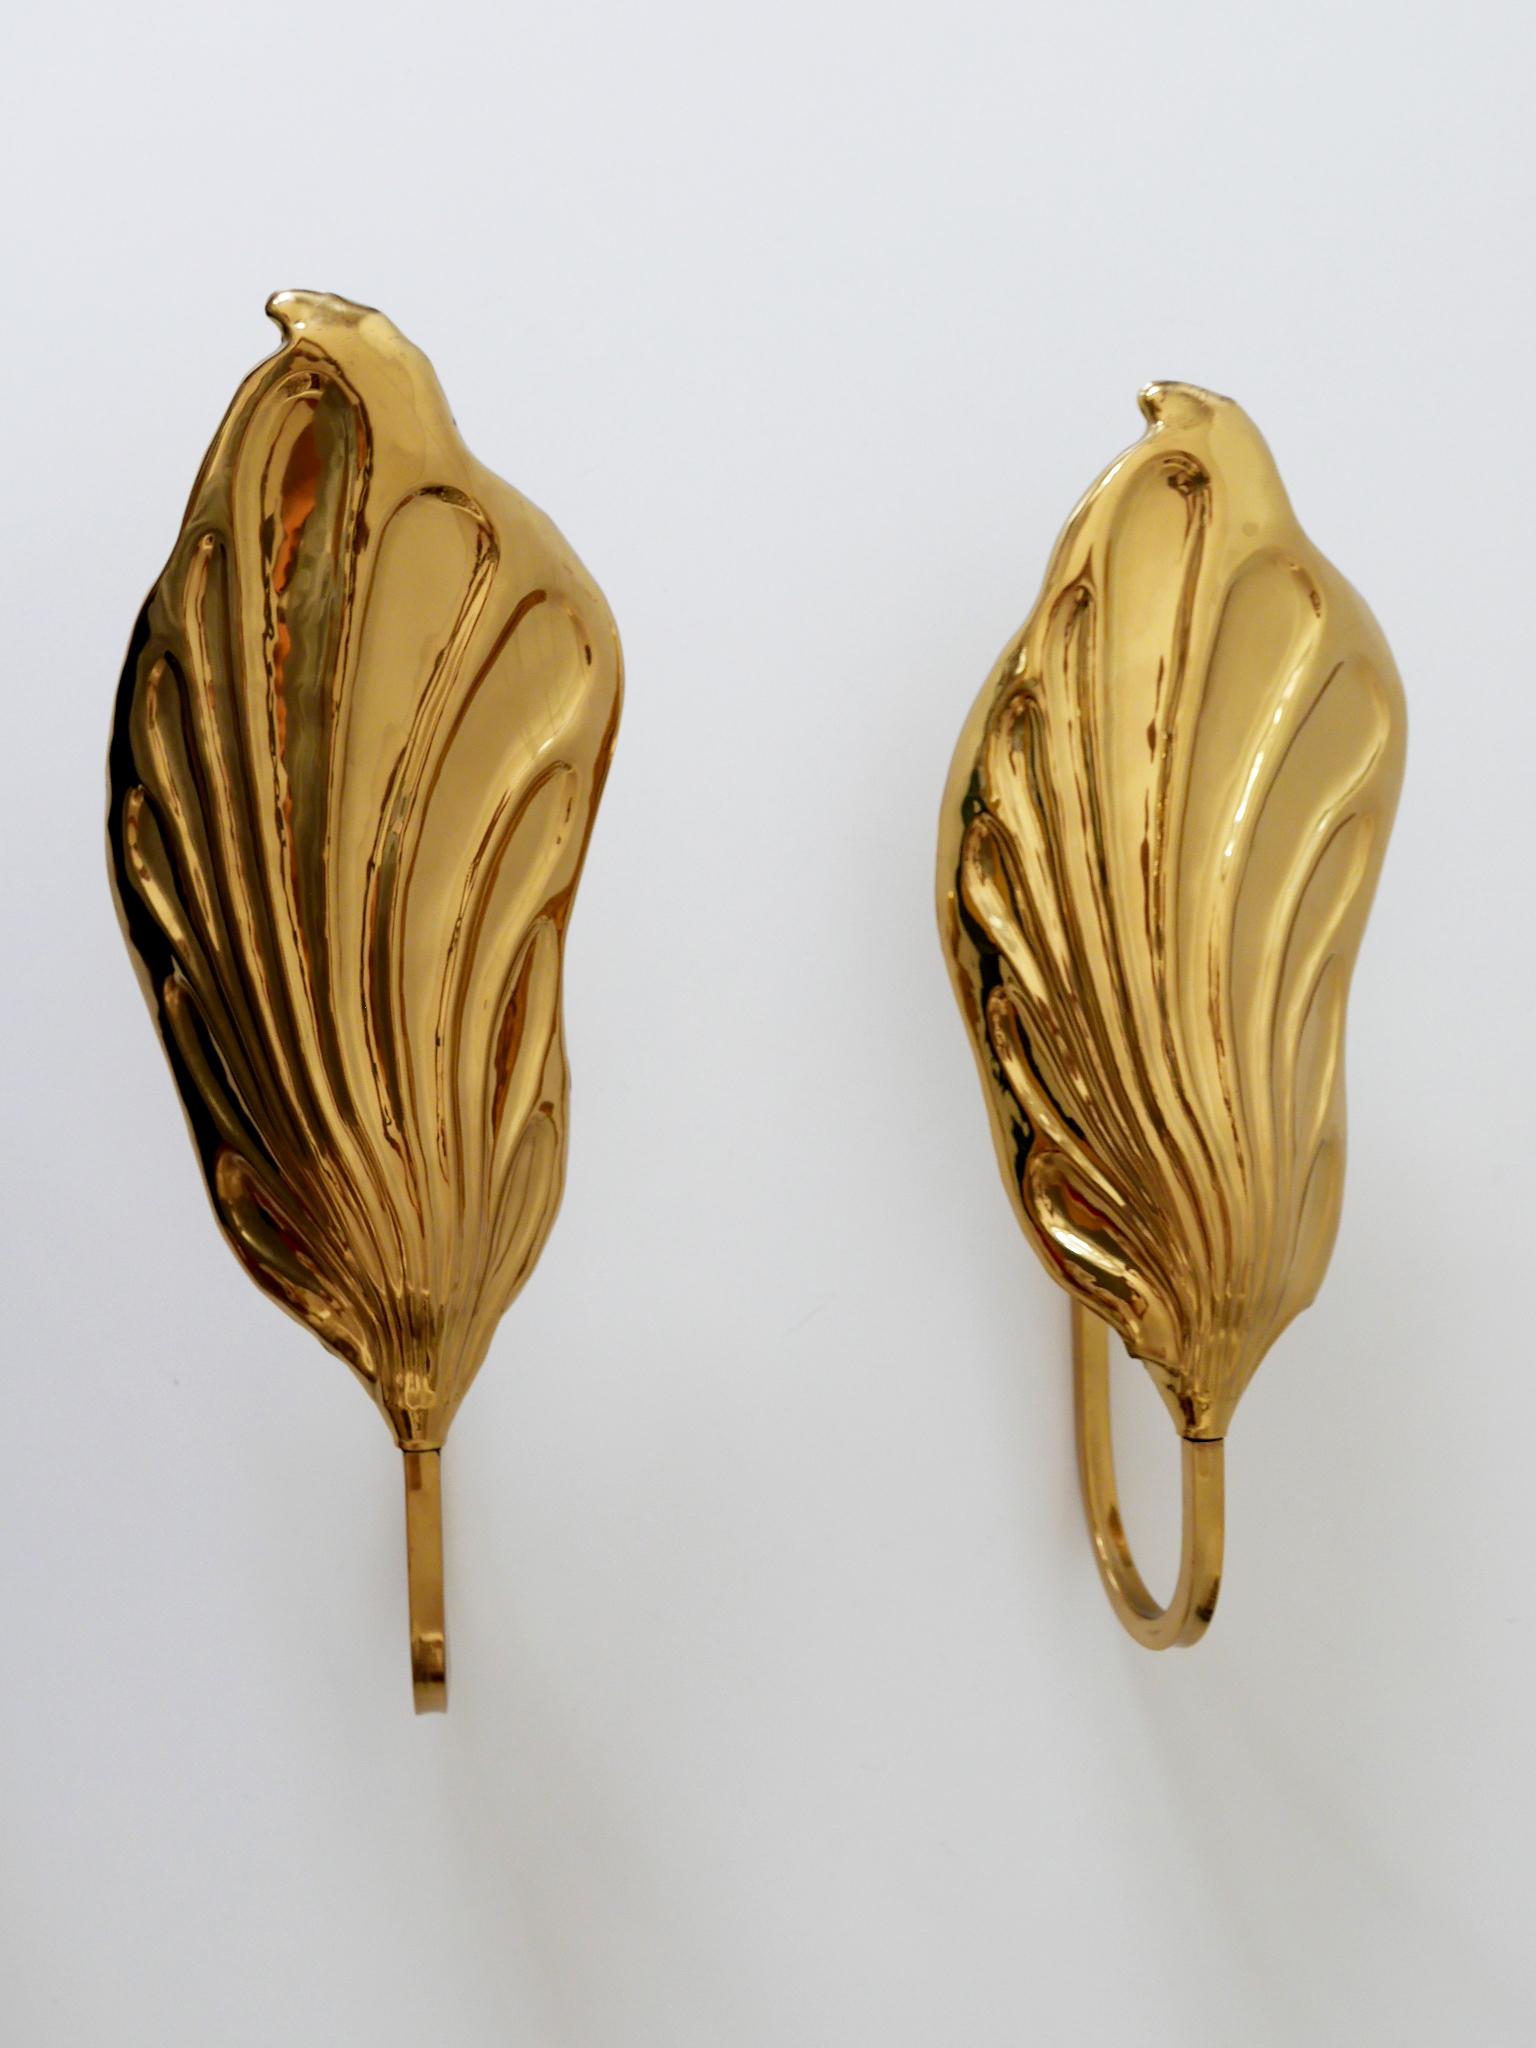 Set of two lovely Mid-Century Modern brass 'Leaf' wall lamps or sconces. Designed by Carlo Giorgi for Bottega Gadda, 1970s, Italy.

Executed in brass, each lamp needs 1 x E14 / E12 Edison screw fit bulb. Max. 40 Watt. The lights are complete, wired,